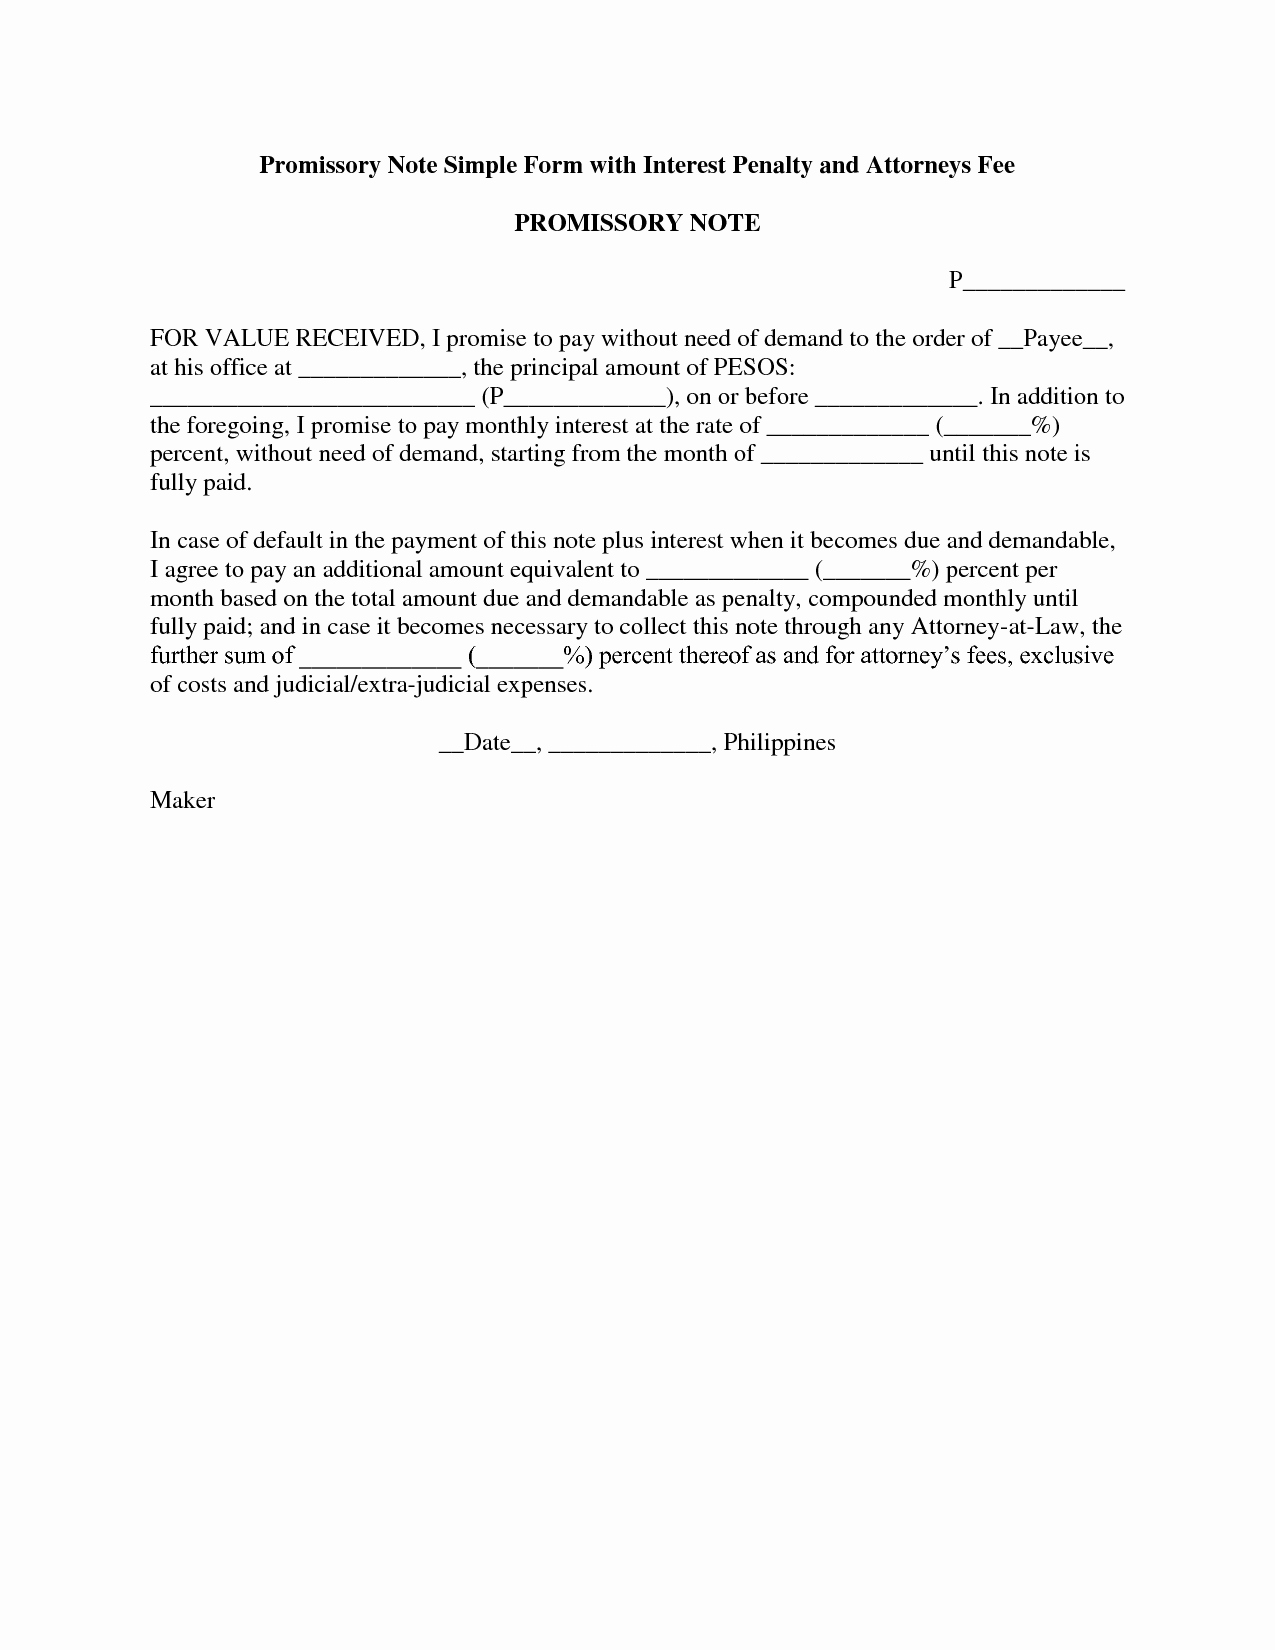 Promissory Note Letter Template with Penalty and attorney